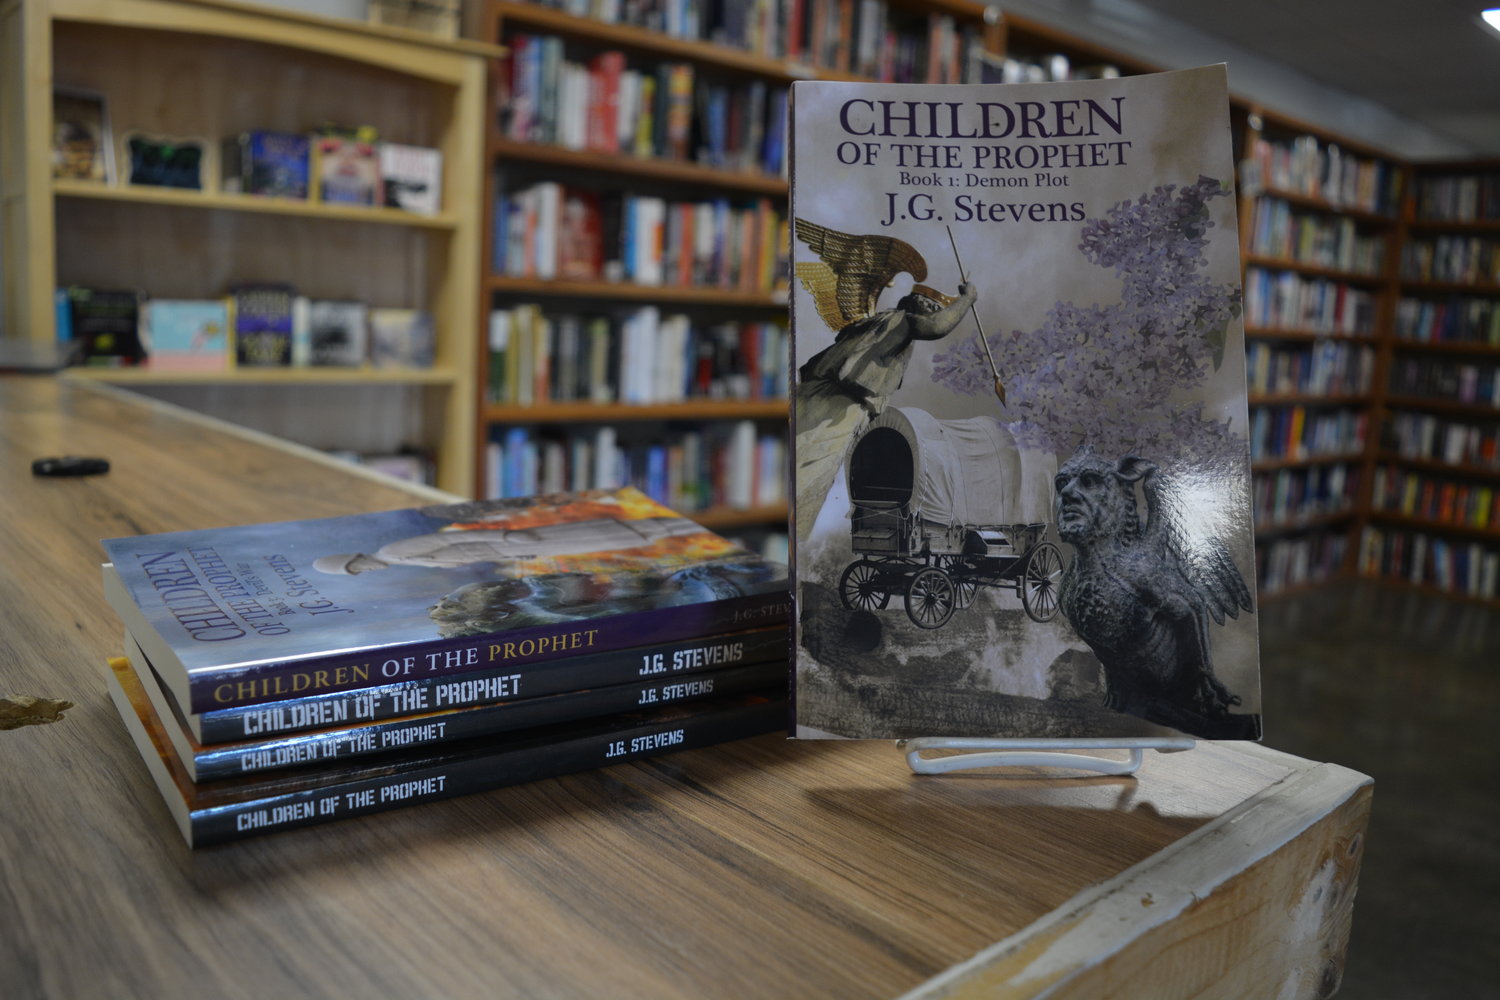 “Children of the Prophet” is a book series written by Brush Prairie resident Joseph Stevens and is available for sale at Literary Leftovers in Battle Ground.